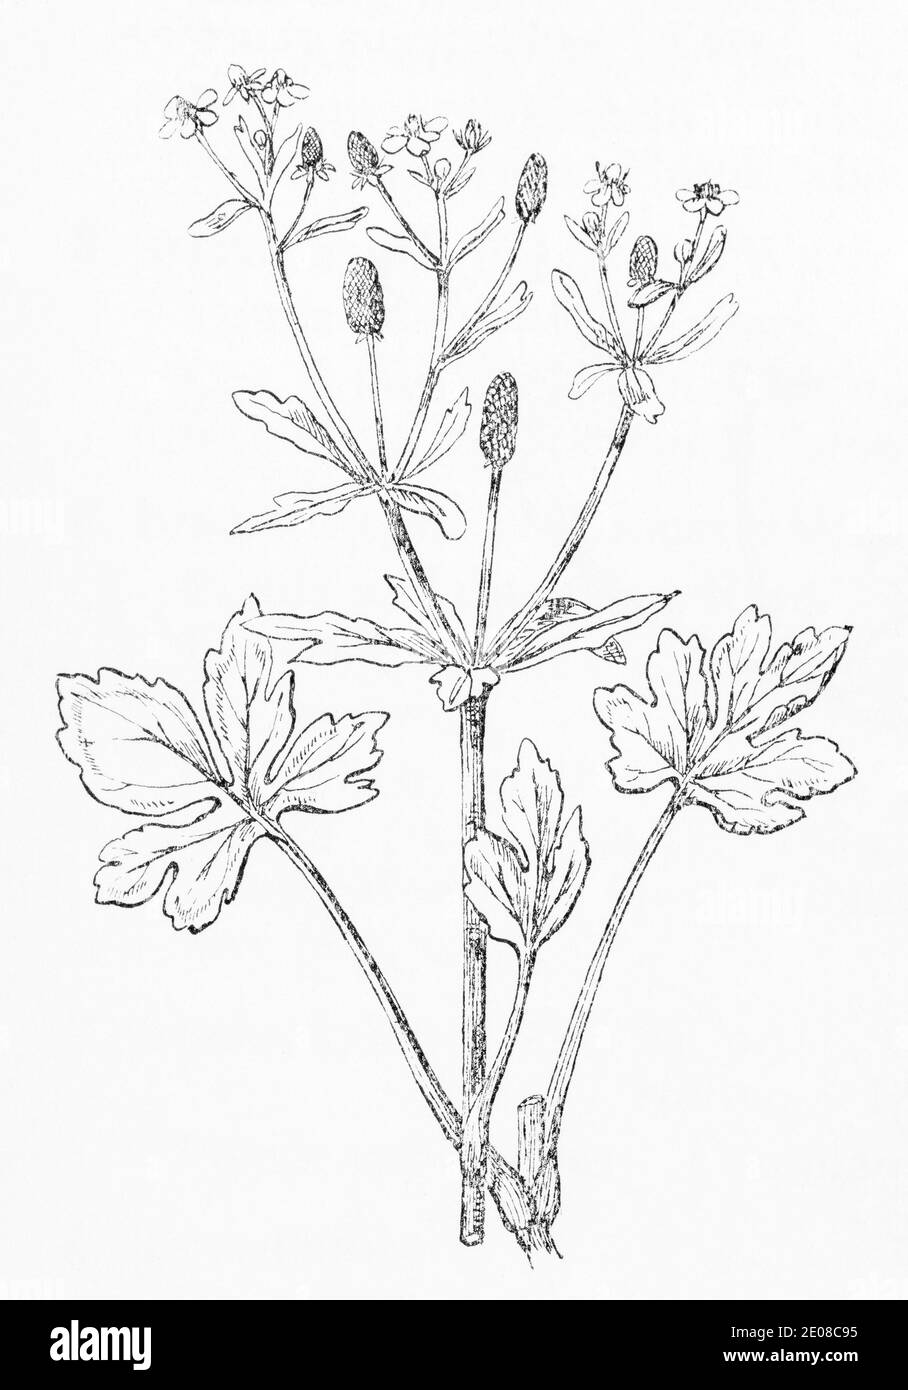 Old botanical illustration engraving of Celery-leaved Crowfoot / Ranunculus sceleratus. Traditional medicinal herbal plant. See Notes Stock Photo